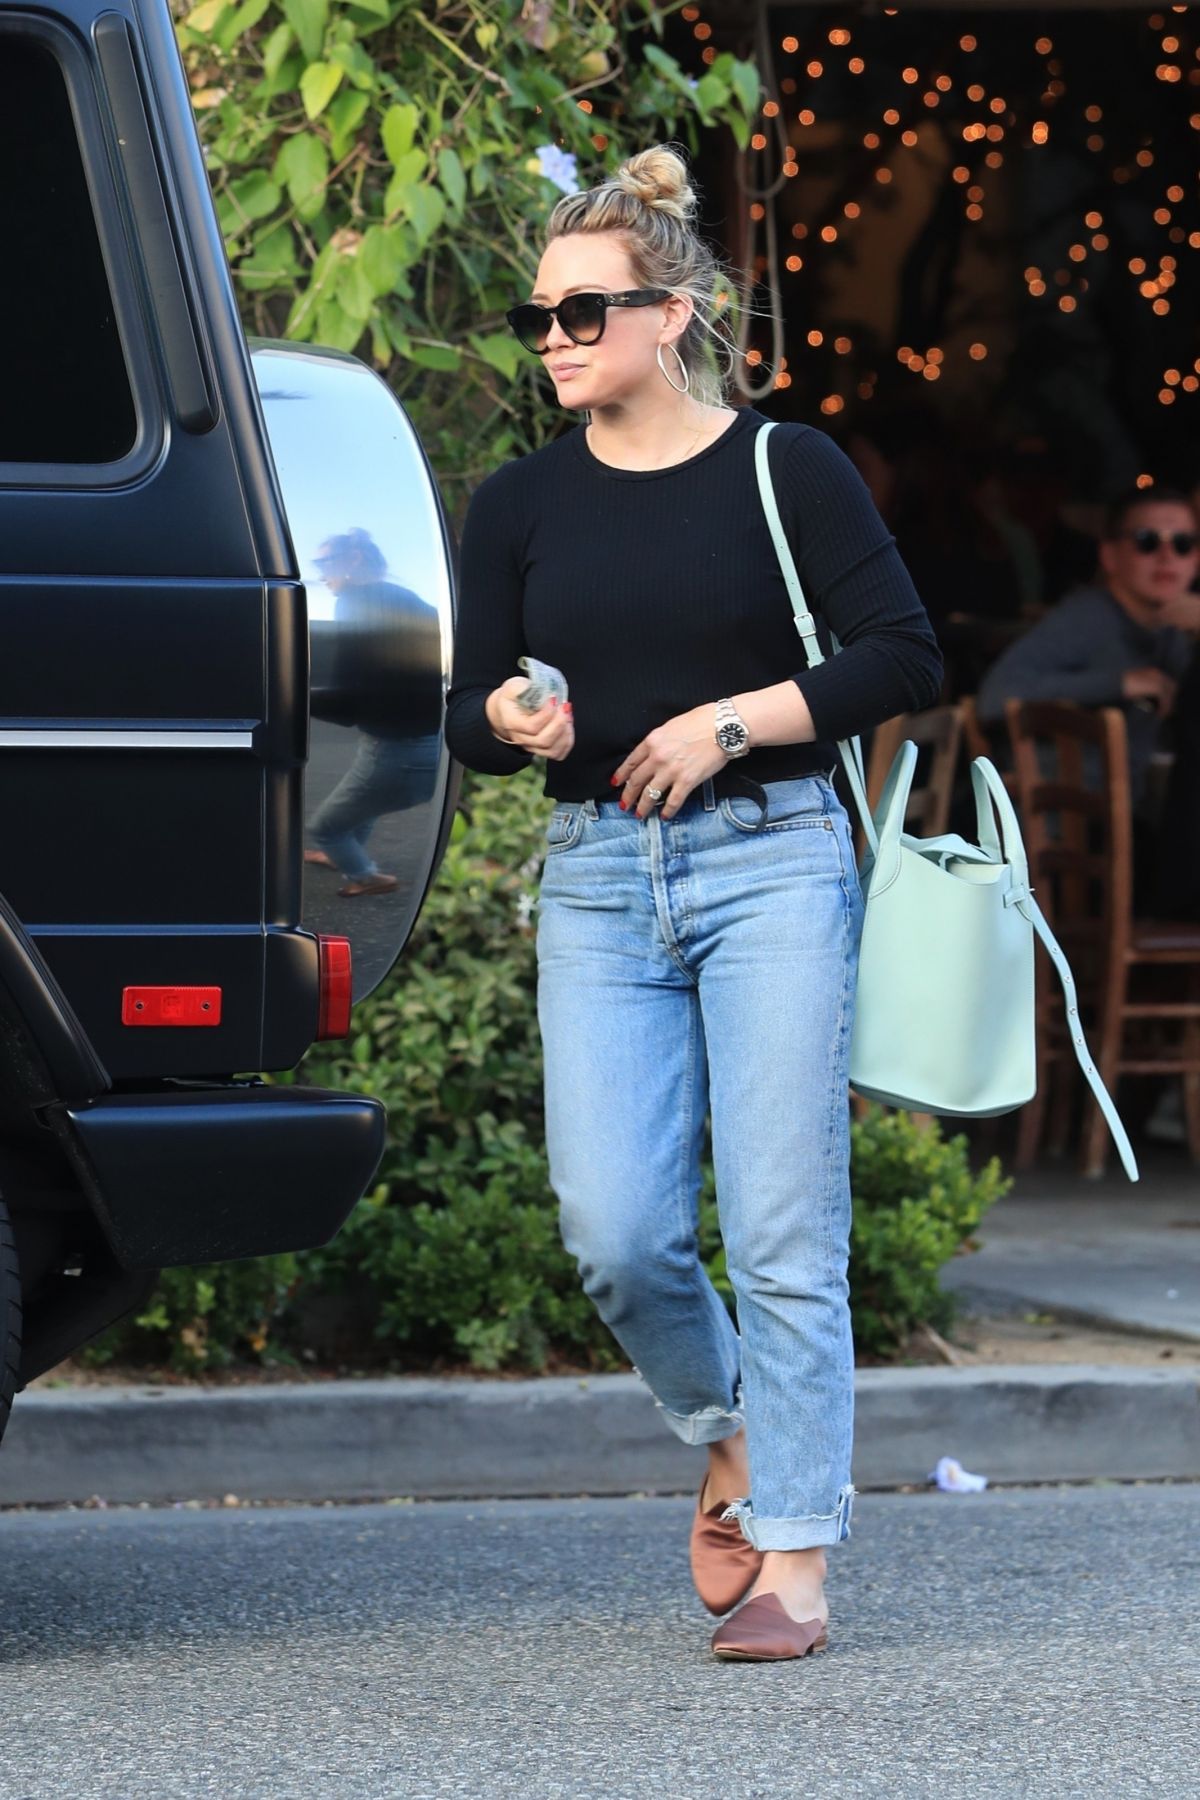 HILARY DUFF at Il Pastaio in Beverly Hills 07/08/2019 – HawtCelebs